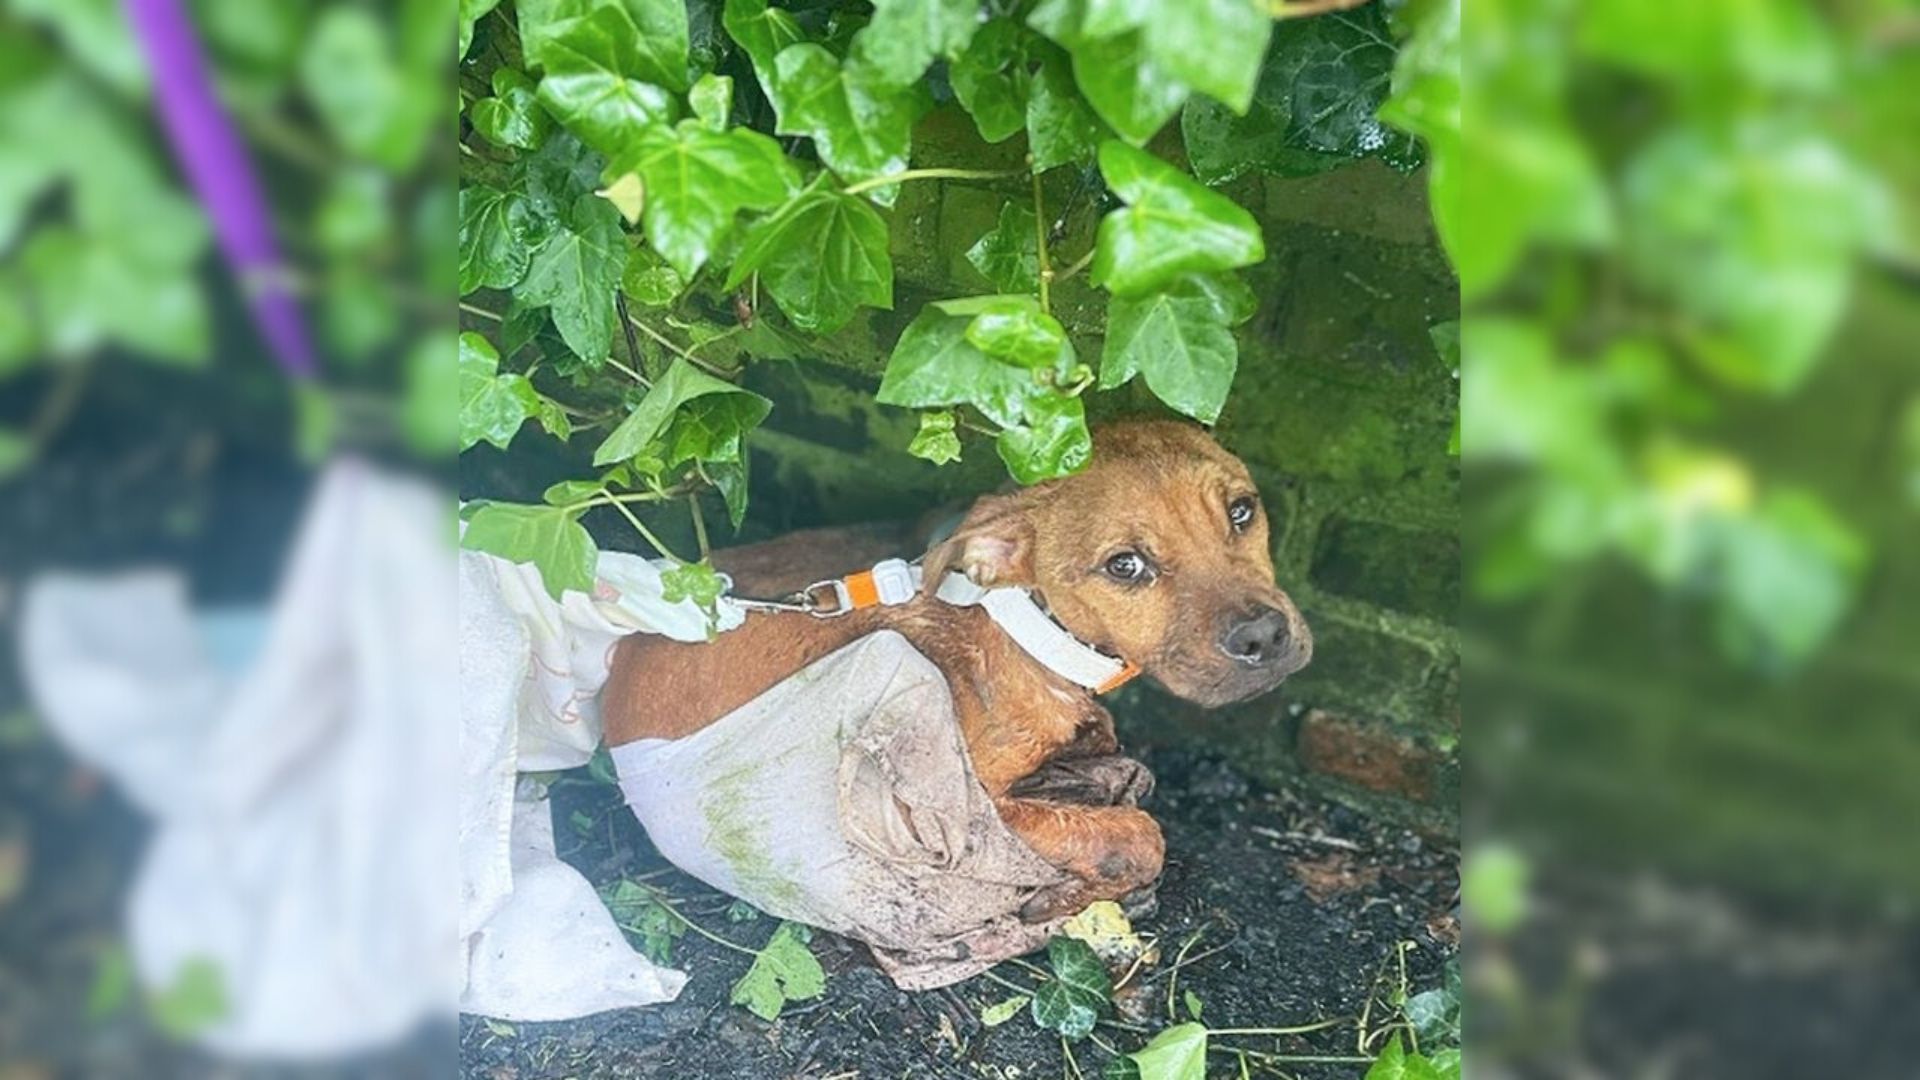 Abandoned Dog Covered In Wounds Was Desperately Crying After His Cruel Owners Tied Him To A Fence